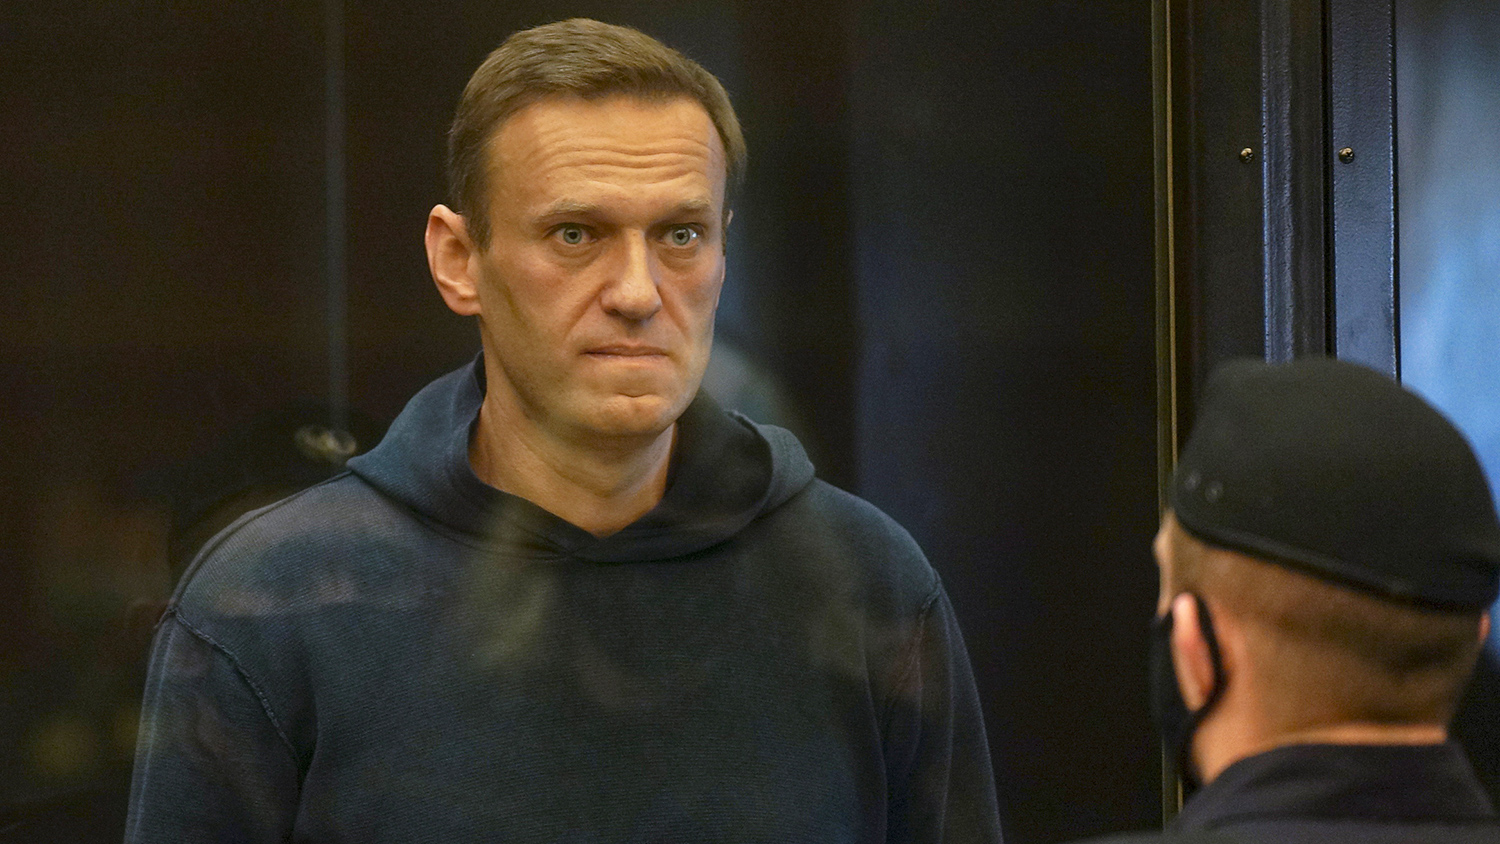 Russian opposition leader Navalny attends a court hearing in Moscow